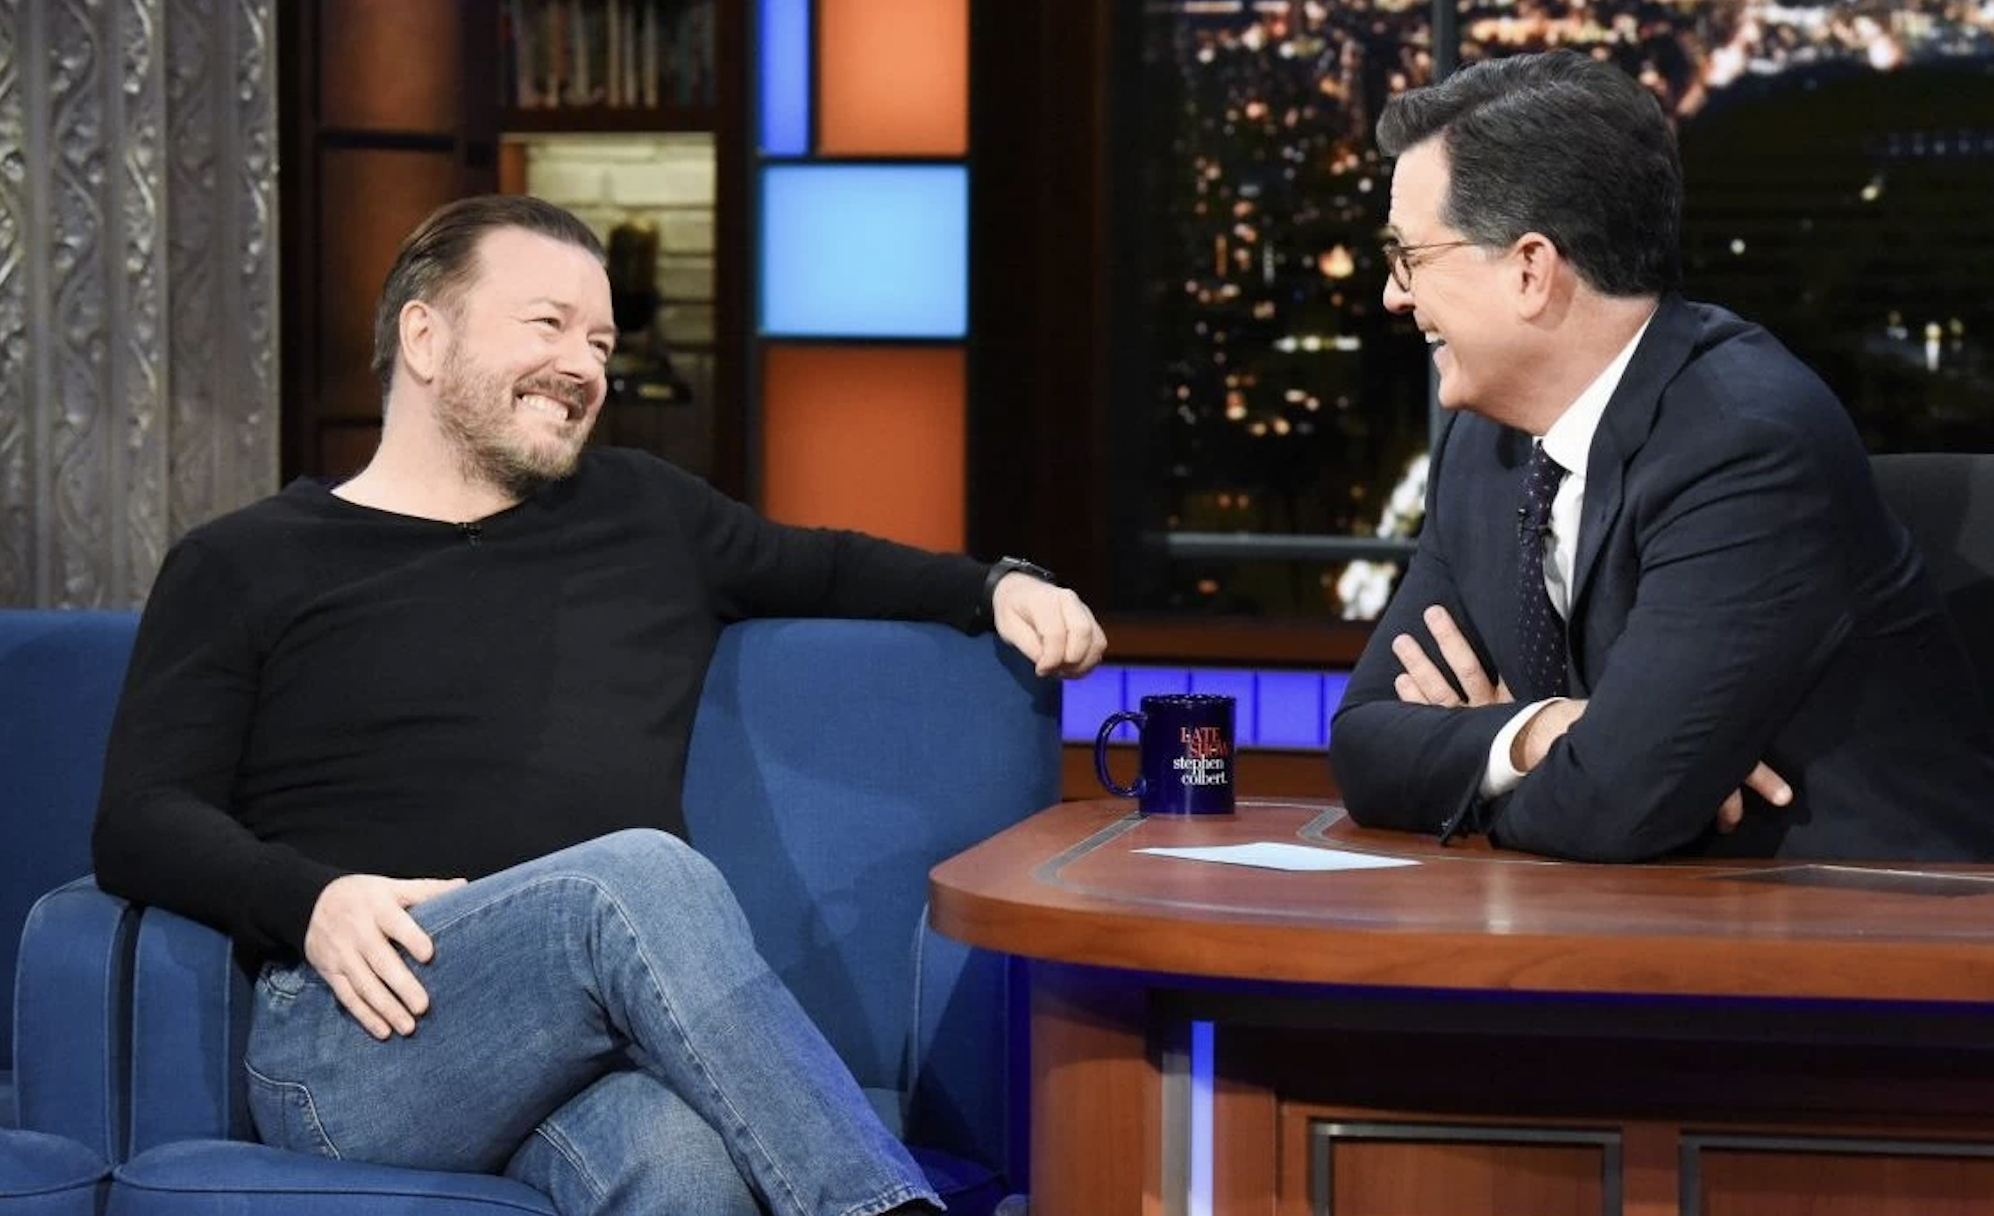 Ricky Gervais Smart People Don't Get Offended by Jokes